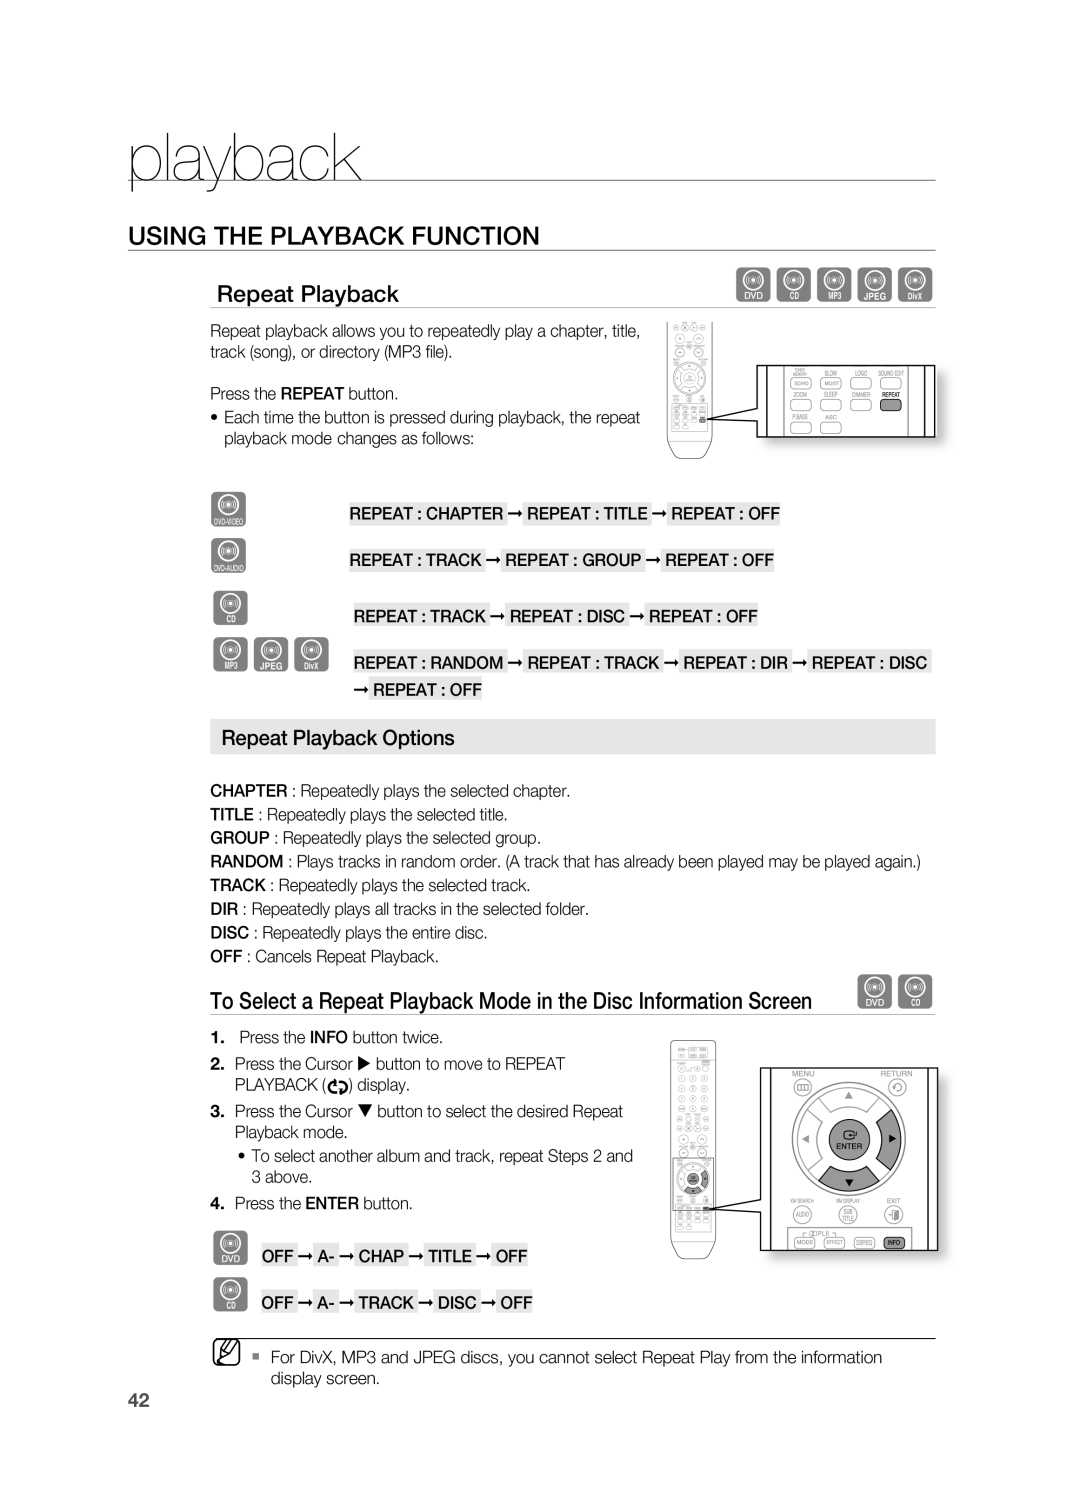 Samsung HT-TZ515 user manual B Agd, playback, dBAGD, USINg THE PLAYBACK FUNCTION, repeat Playback Options 